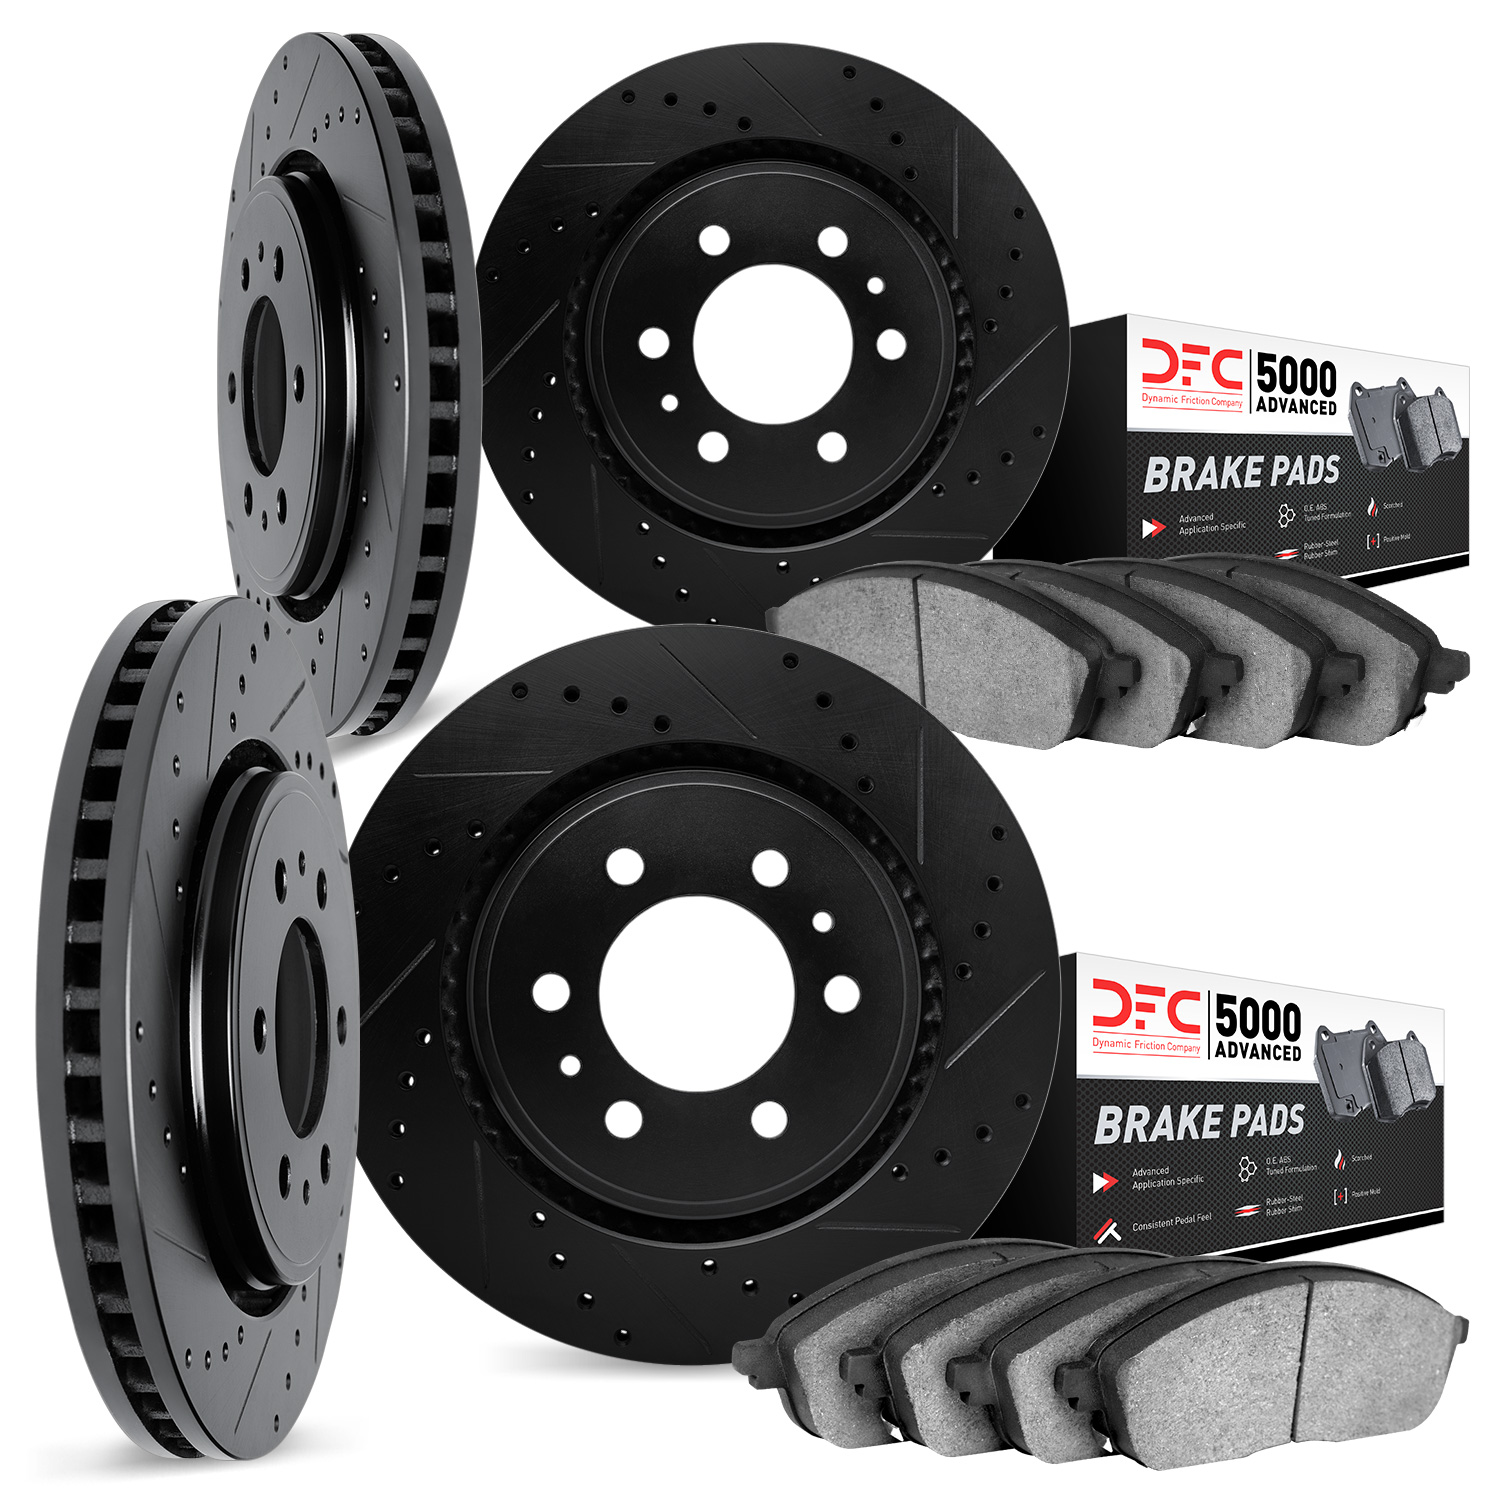 8504-48035 Drilled/Slotted Brake Rotors w/5000 Advanced Brake Pads Kit [Black], 2002-2005 GM, Position: Front and Rear